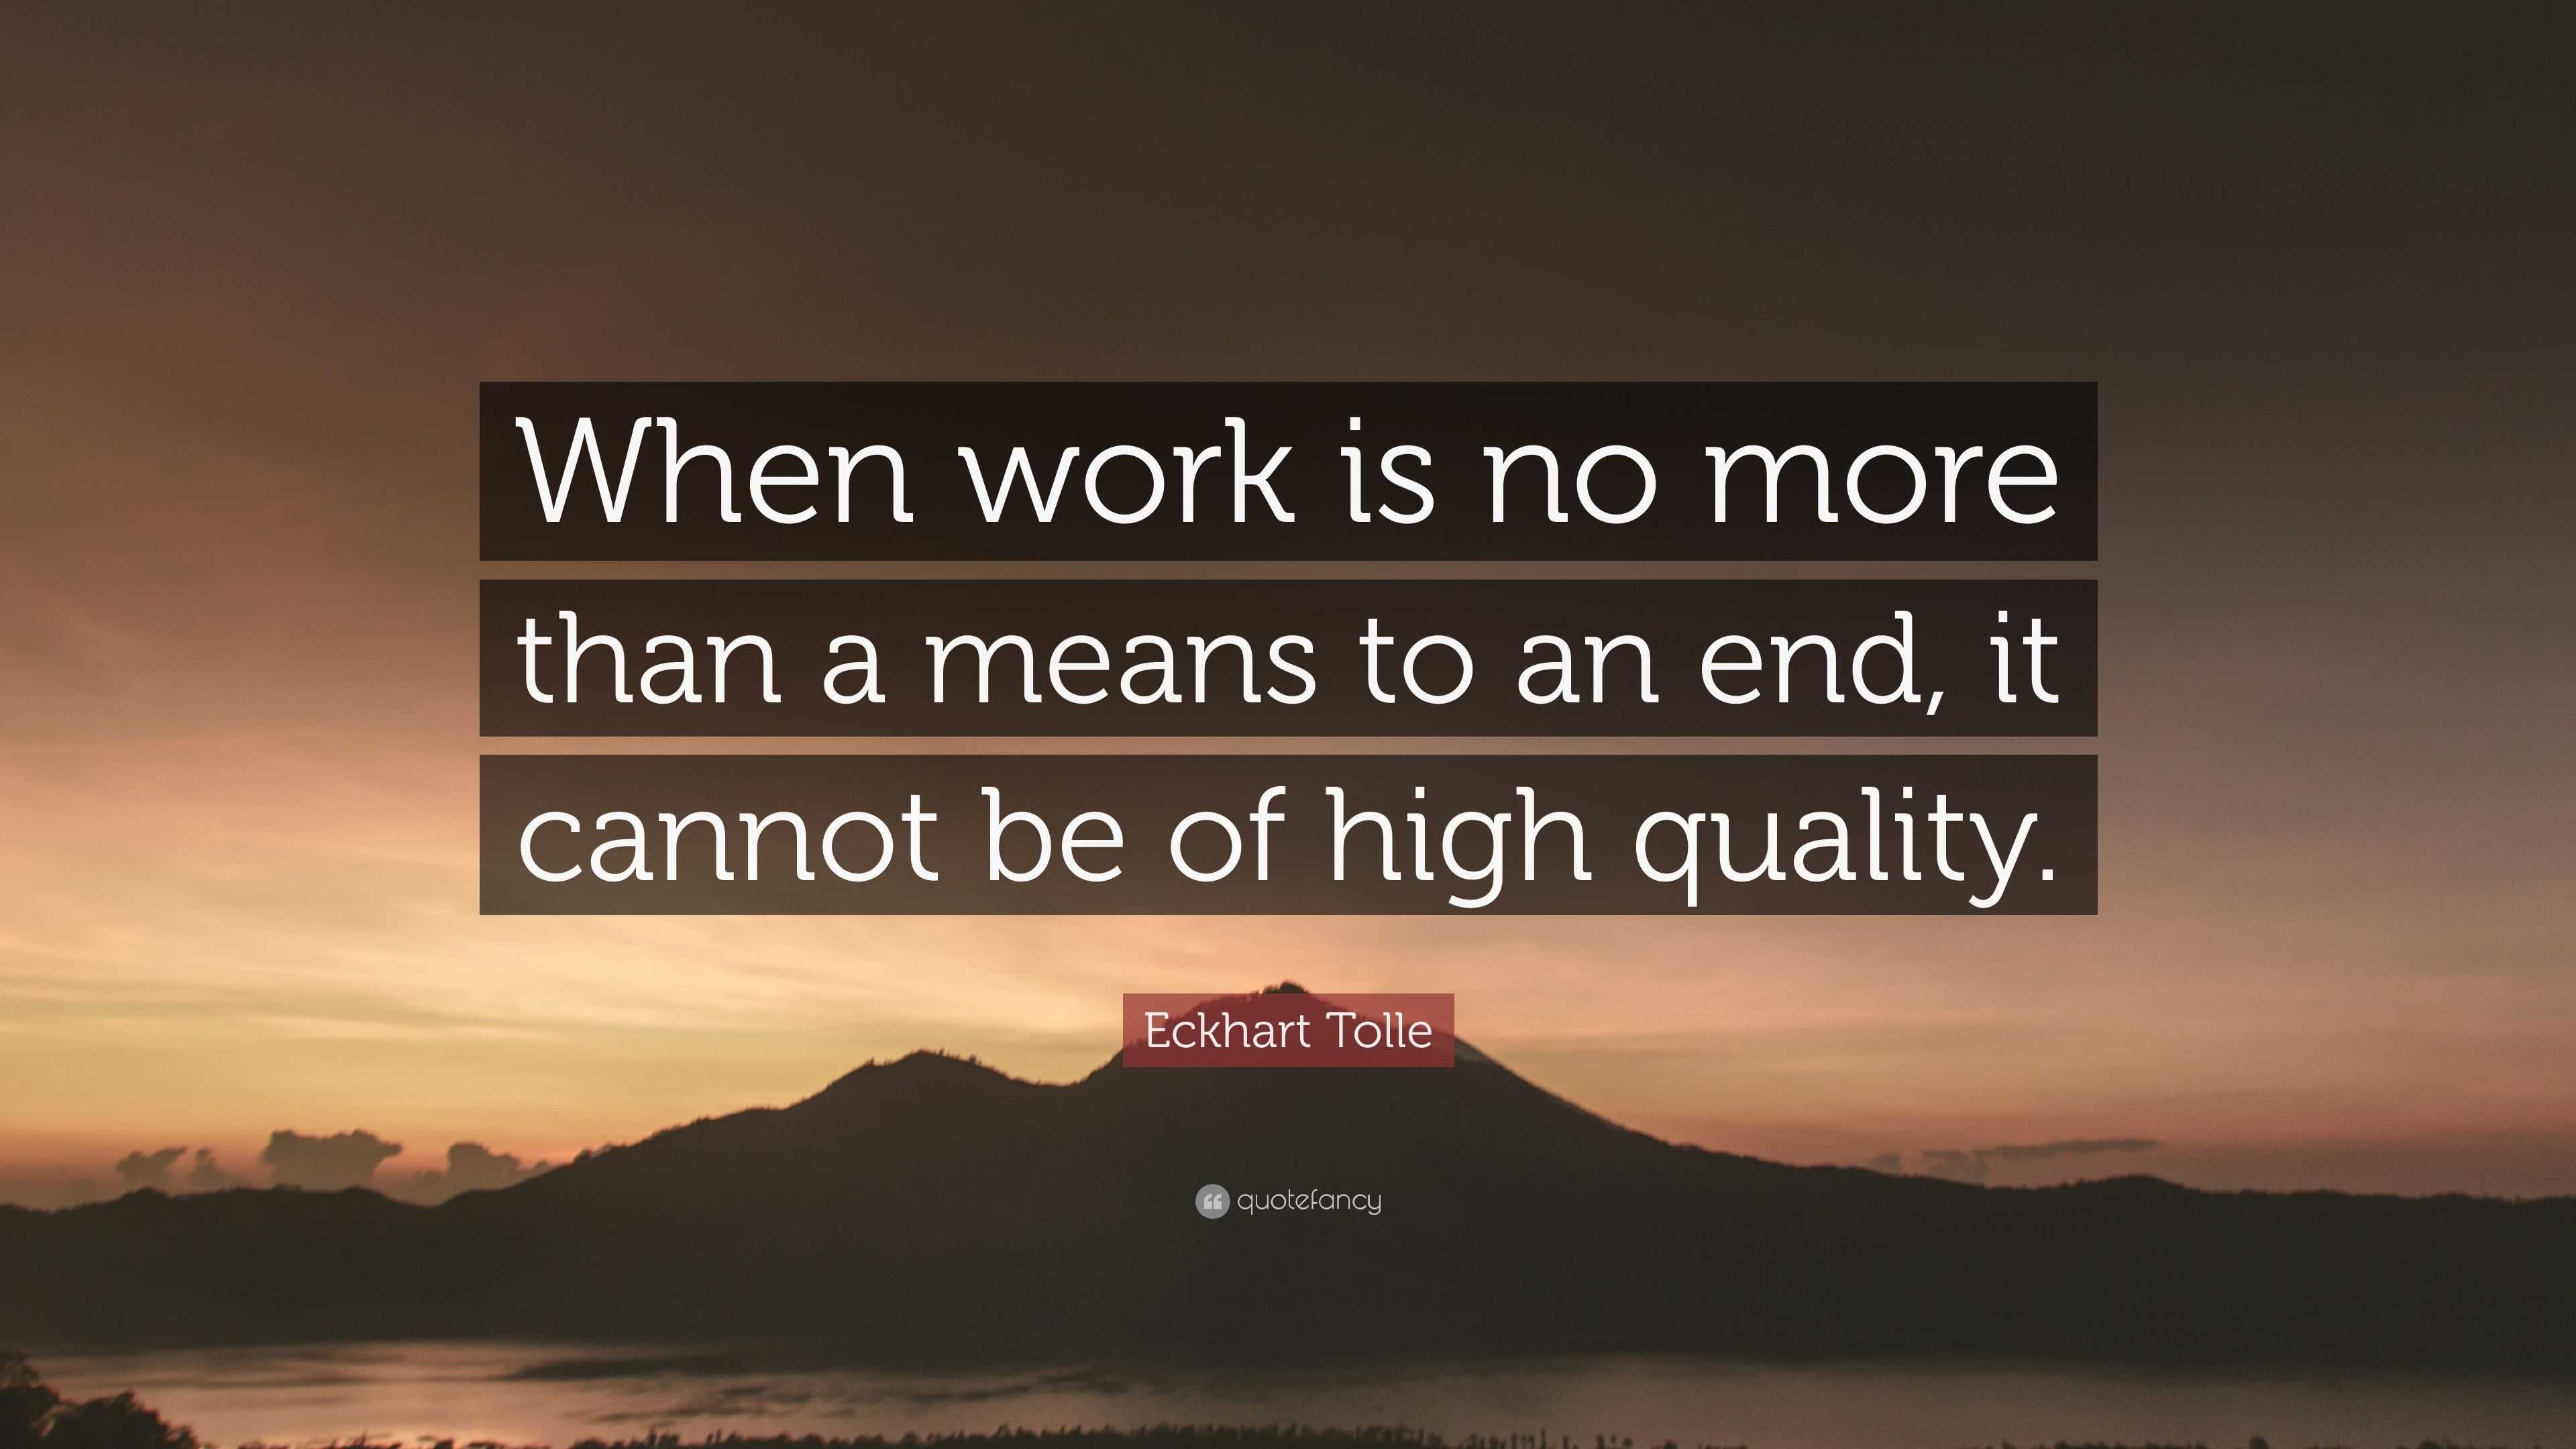 Eckhart Tolle Quote: “When work is no more than a means to an end, it ...